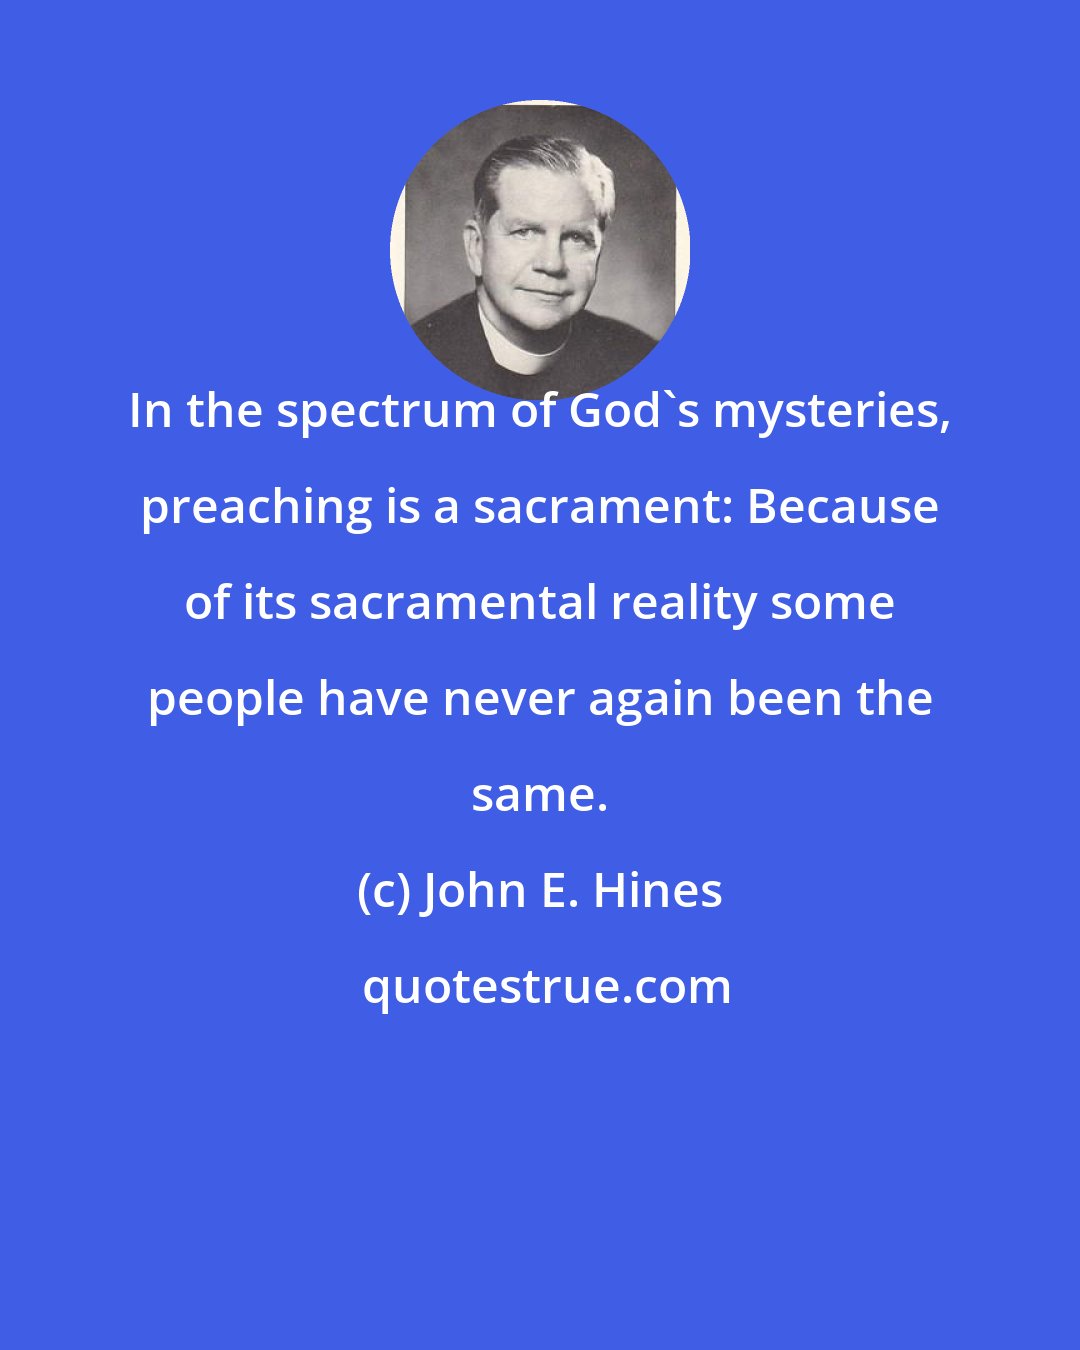 John E. Hines: In the spectrum of God's mysteries, preaching is a sacrament: Because of its sacramental reality some people have never again been the same.